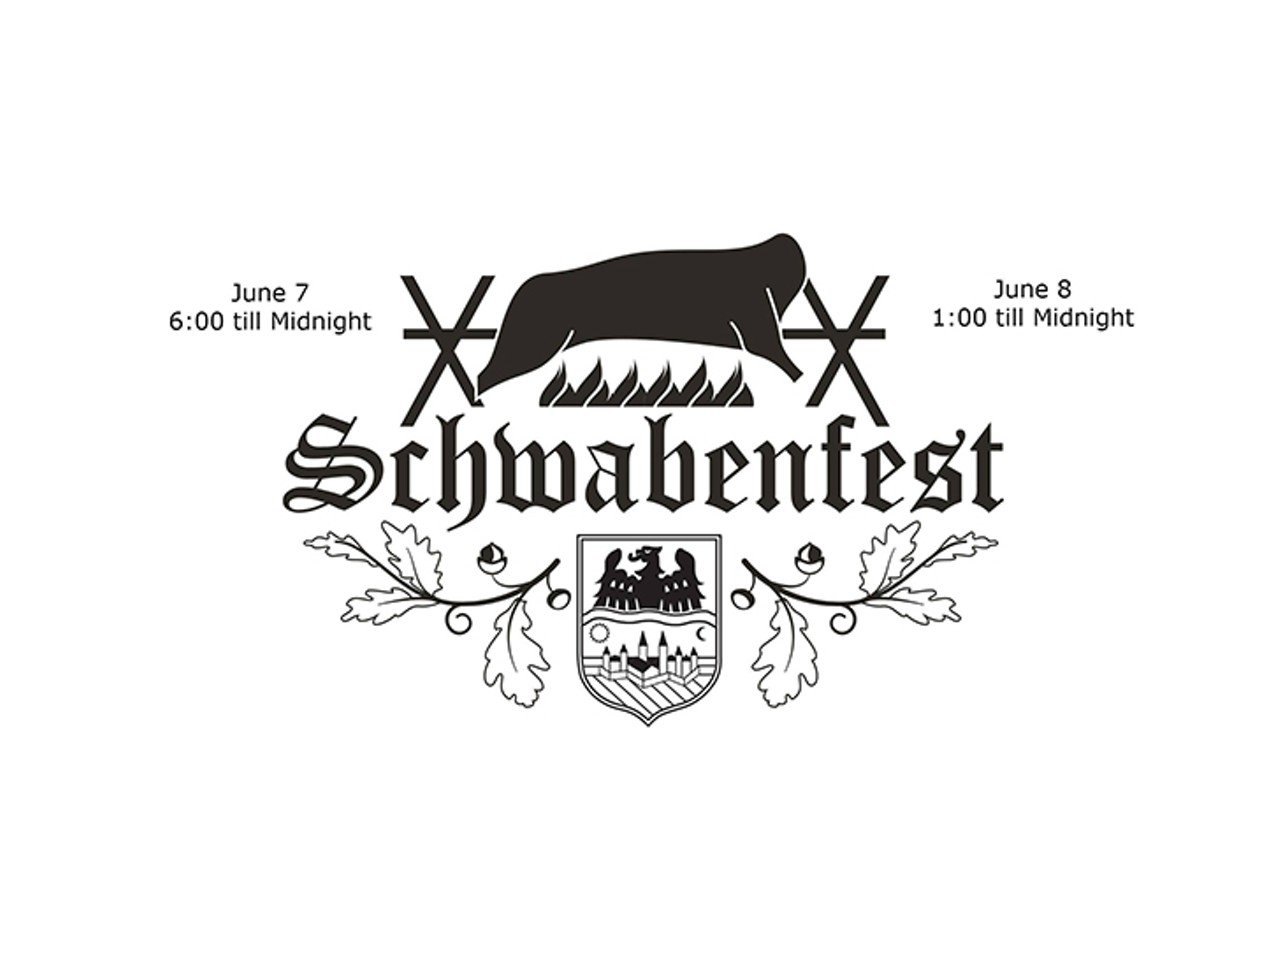 FRIDAY 07
EVENT: Schwabenfest
Party like a German with the Cincinnati Donauschwaben Society. Enjoy authentic bier, music and food while taking in traditional dance performances from the Donauschwaben groups. Oktoberfest-style chicken dinners will be available on Friday, and you can come back on Saturday to try some roasted ox as well. 6 p.m.-midnight Friday; 1 p.m.-midnight Saturday. $3 admission; free 12 and under. Donauschwaben Reception Hall, 4290 Dry Ridge Road, Colerain, cincydonau.com.
Photo: Provided by Schwabenfest